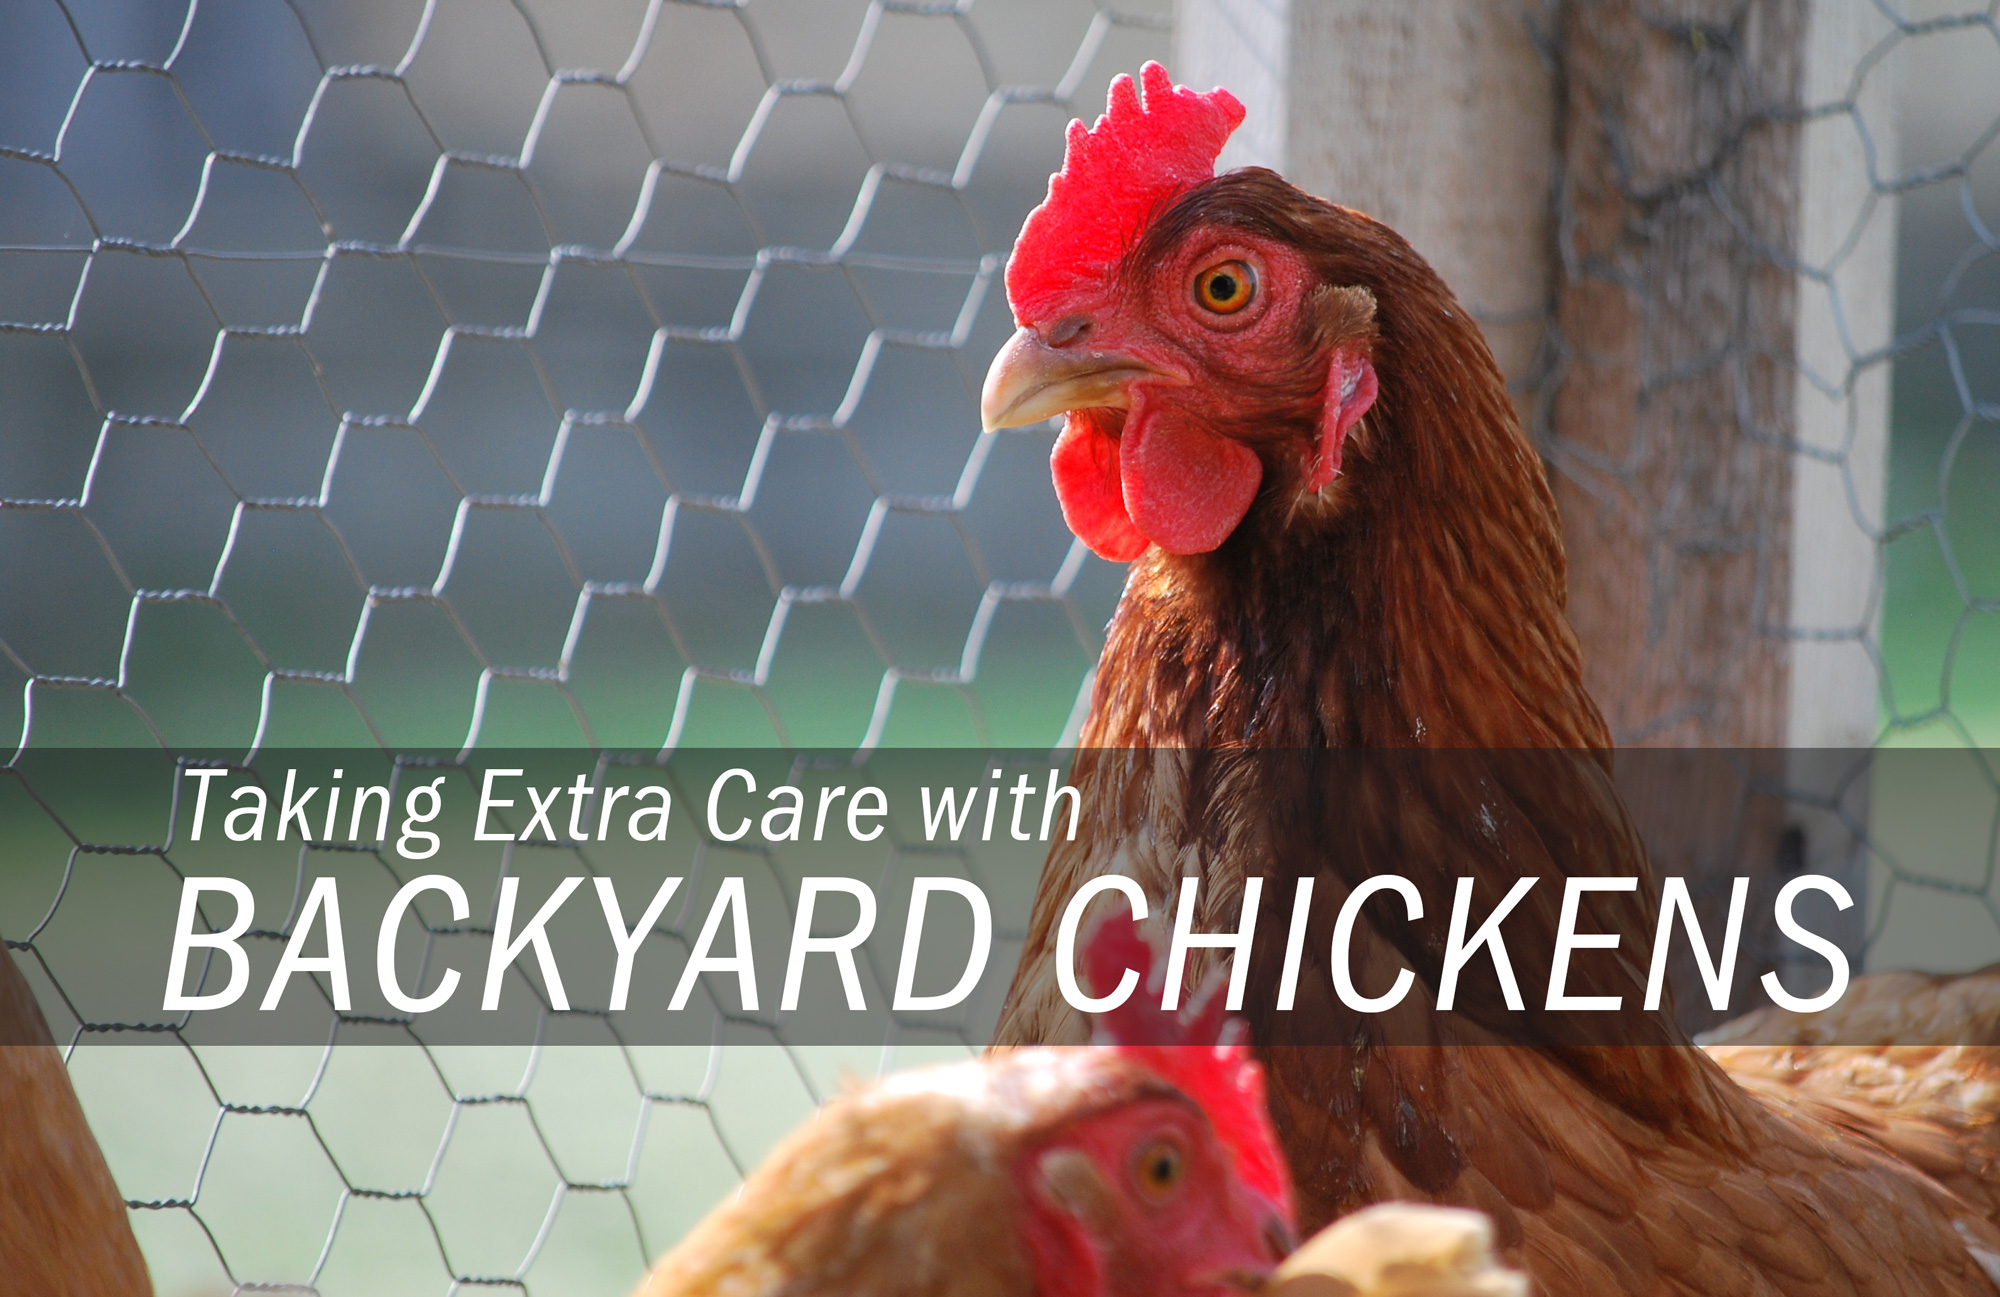 Outbreaks of Human Salmonella Infections Linked to Live Poultry in Backyard Flocks